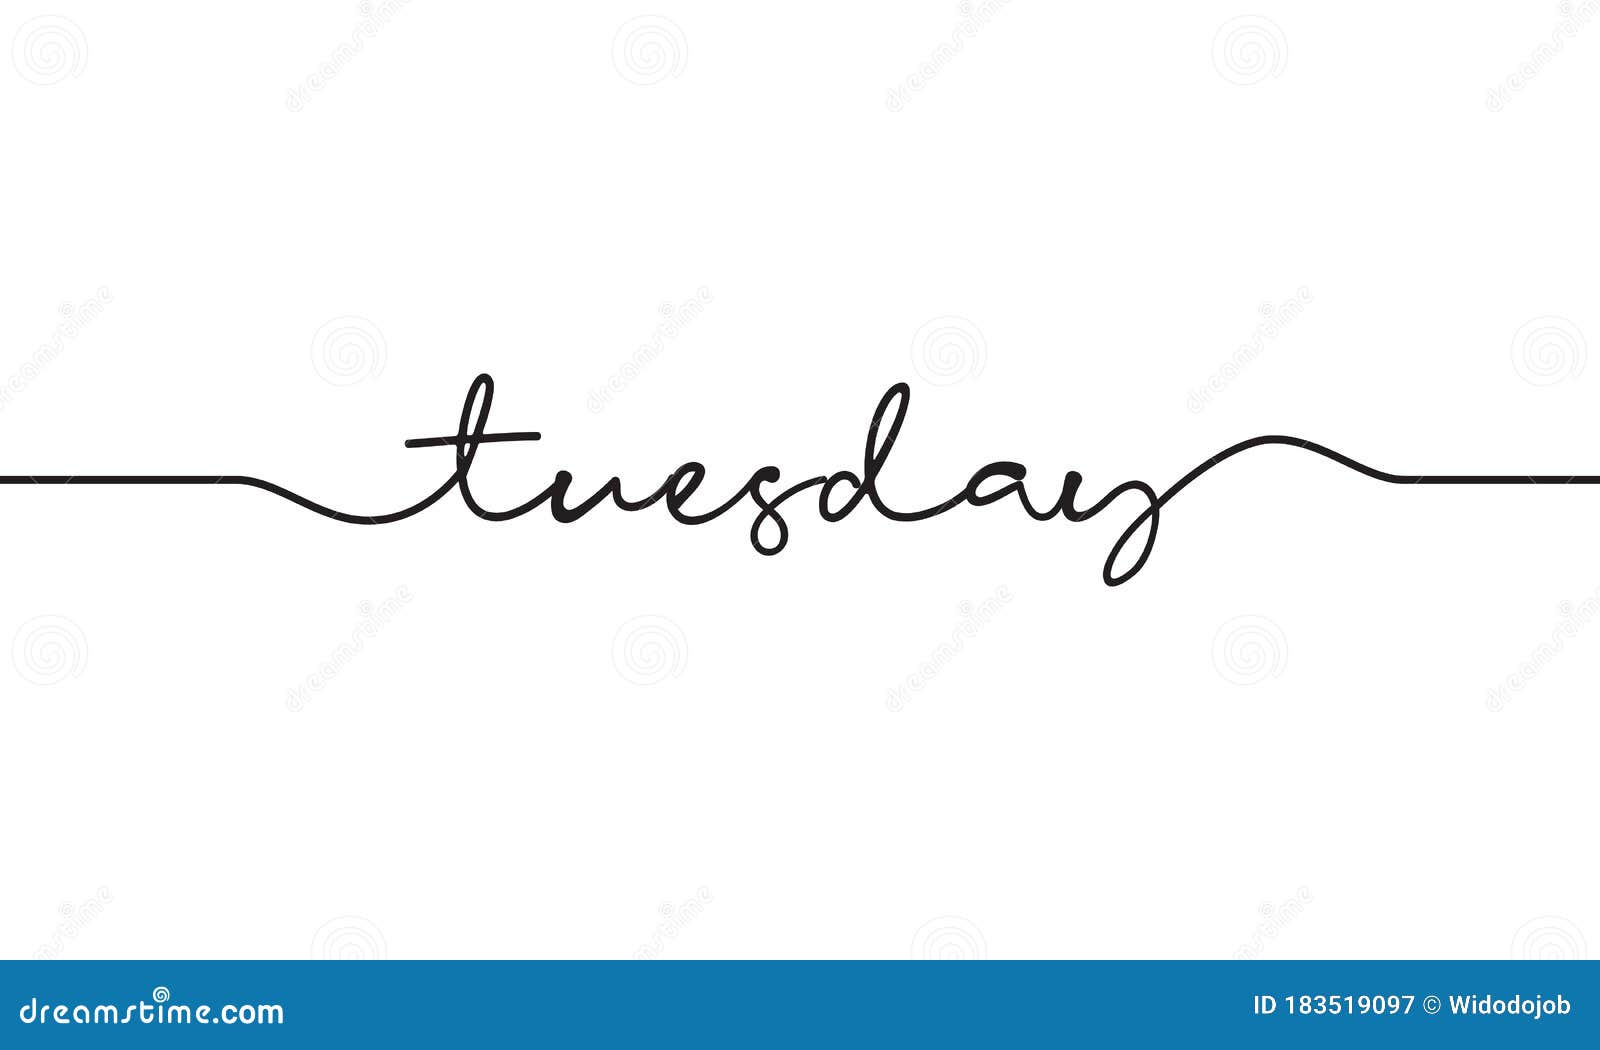 Featured image of post Tuesday Word Calligraphy / Calligraphy is an artistic writing style where the pressure is varied to create thick and thin lines, all in a single stroke.